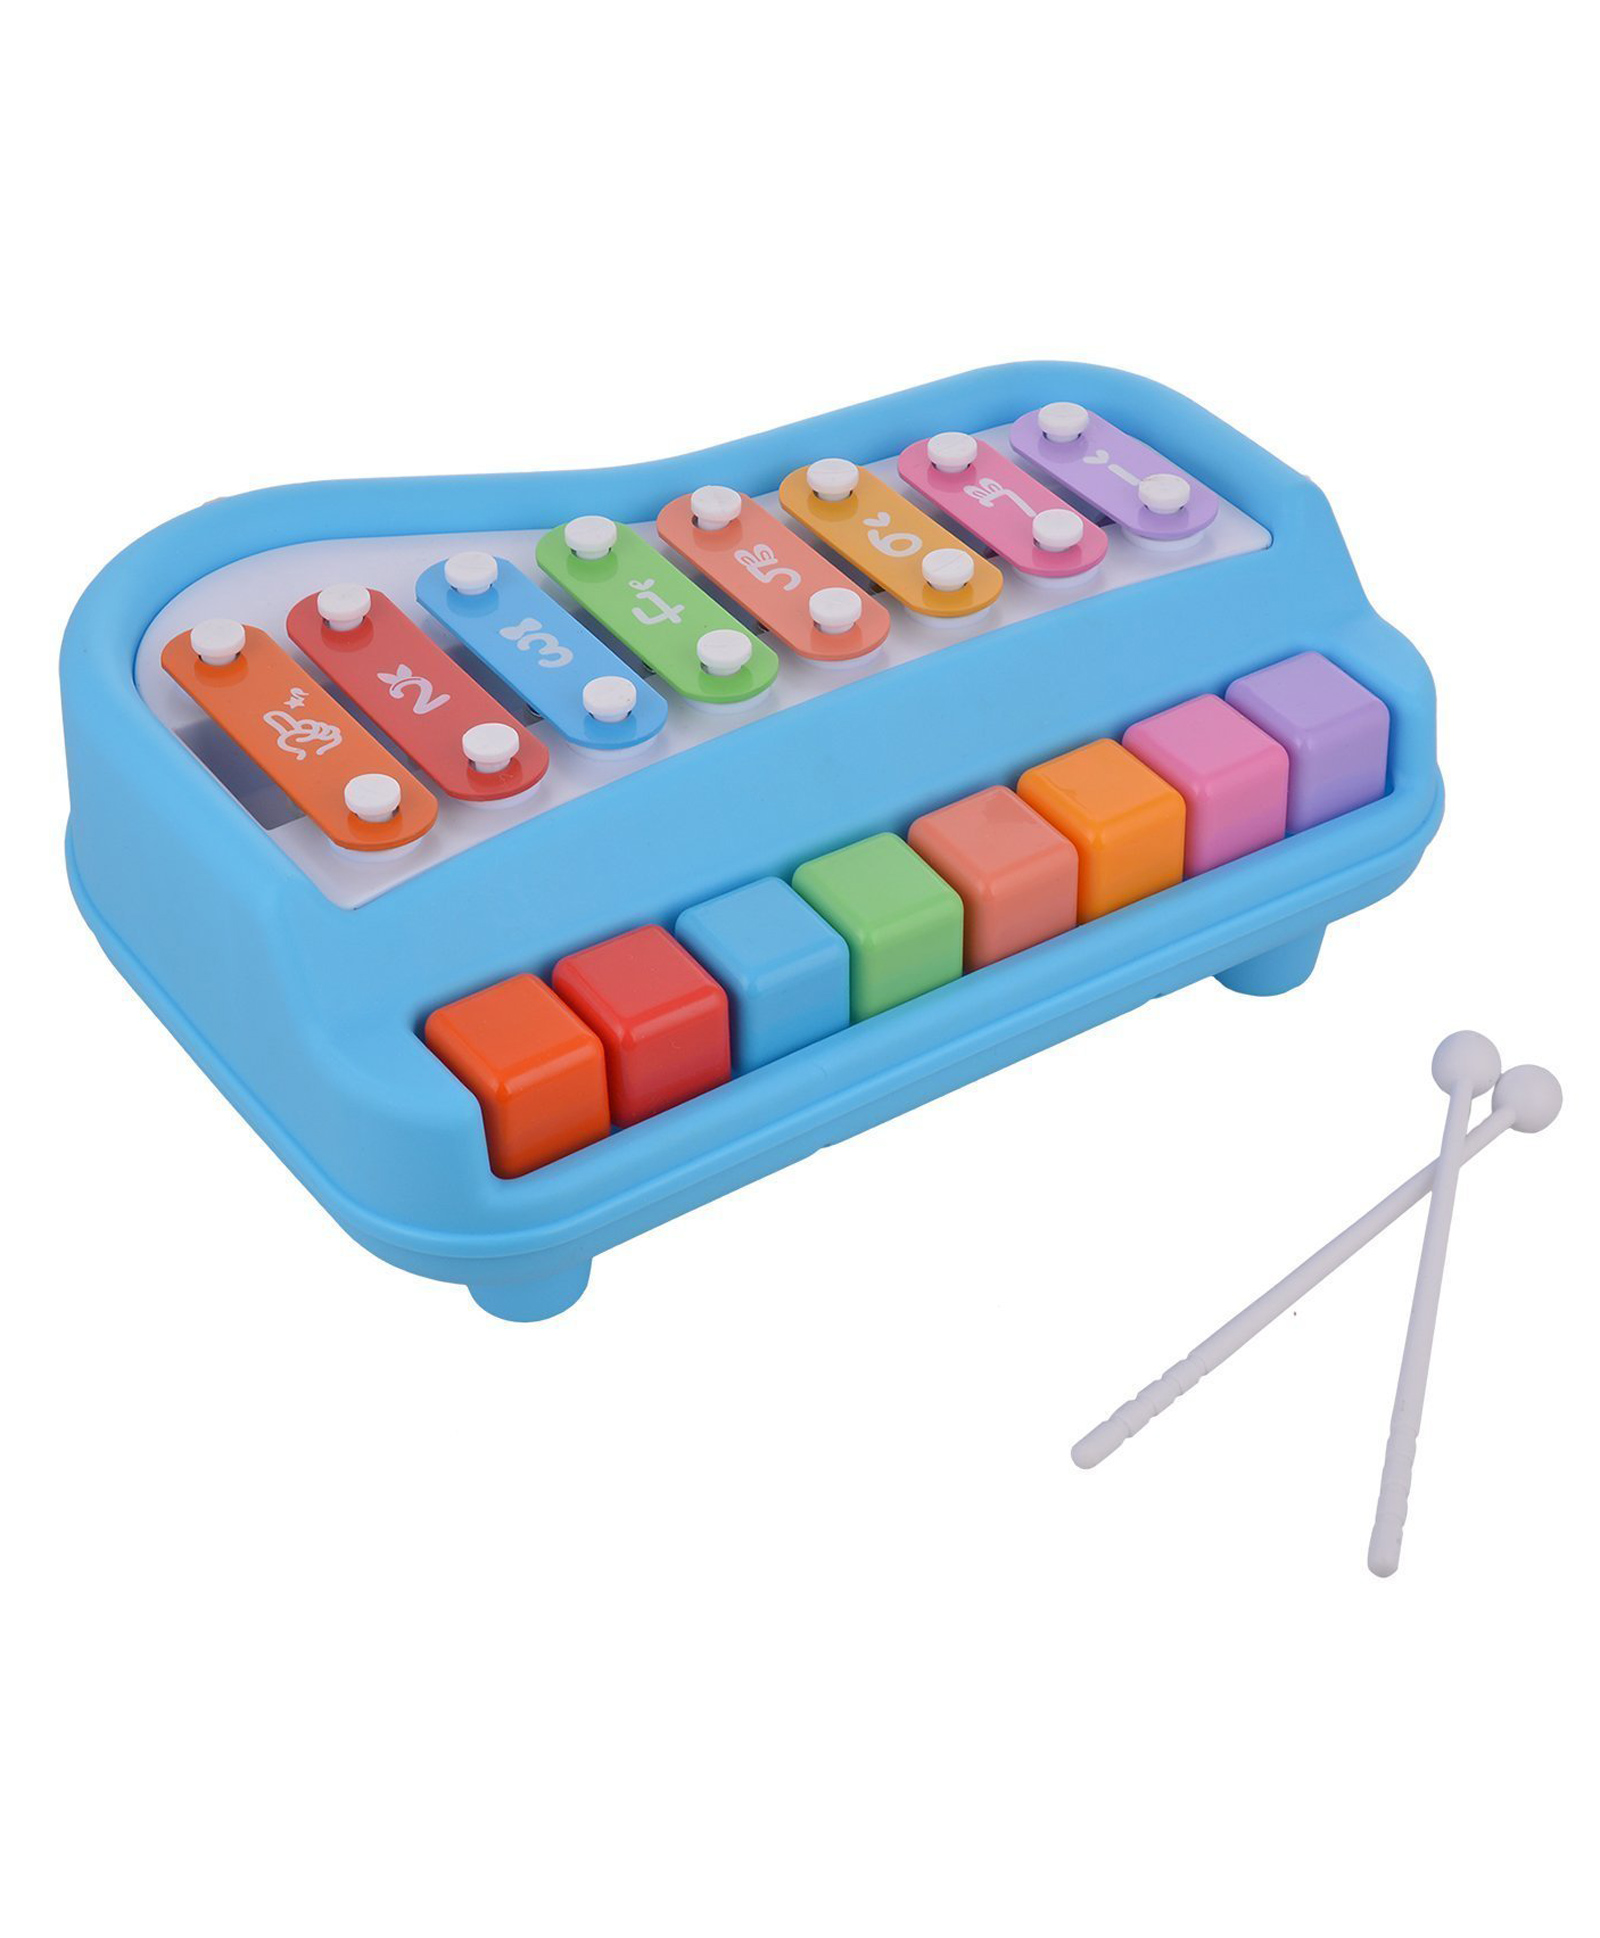 32 keys Glockenspiel Professional xylophone with Stand Bag Rubber Mallets Note Holder